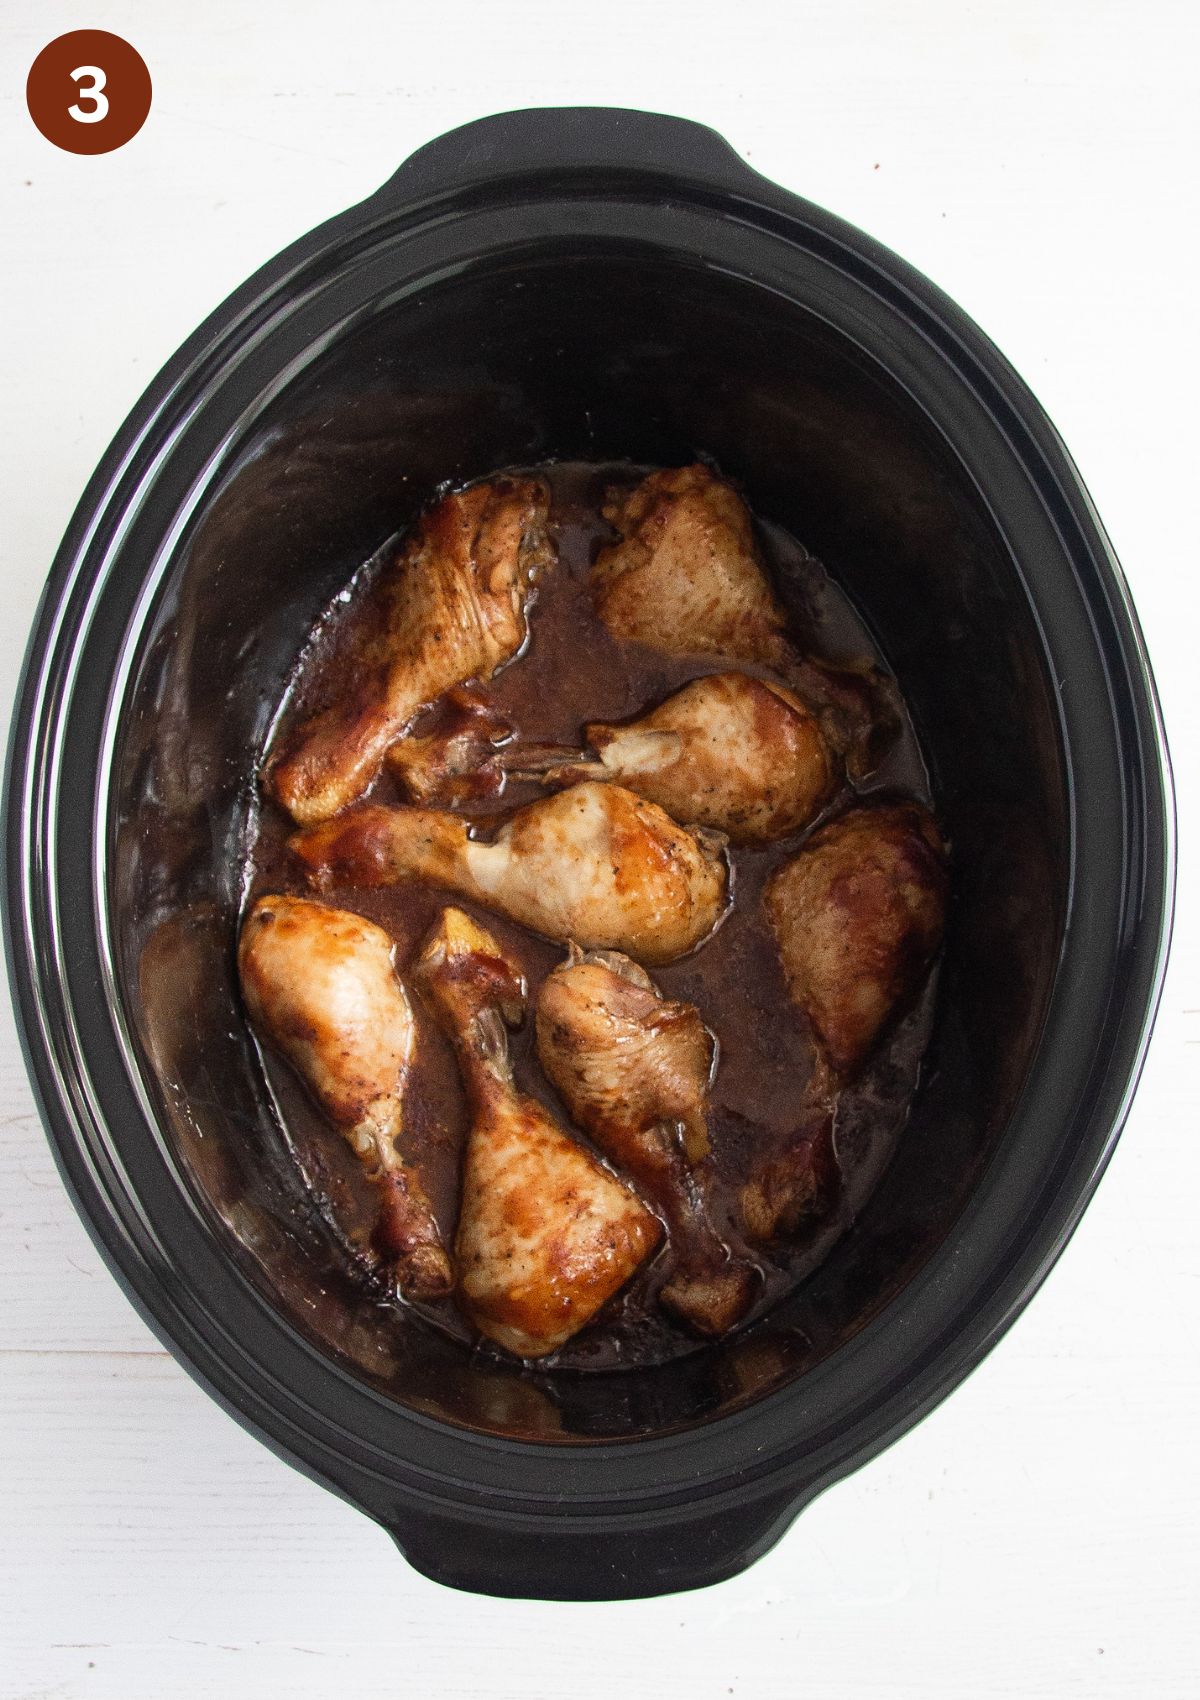 cooked chicken legs in the pot of a slow cooker.